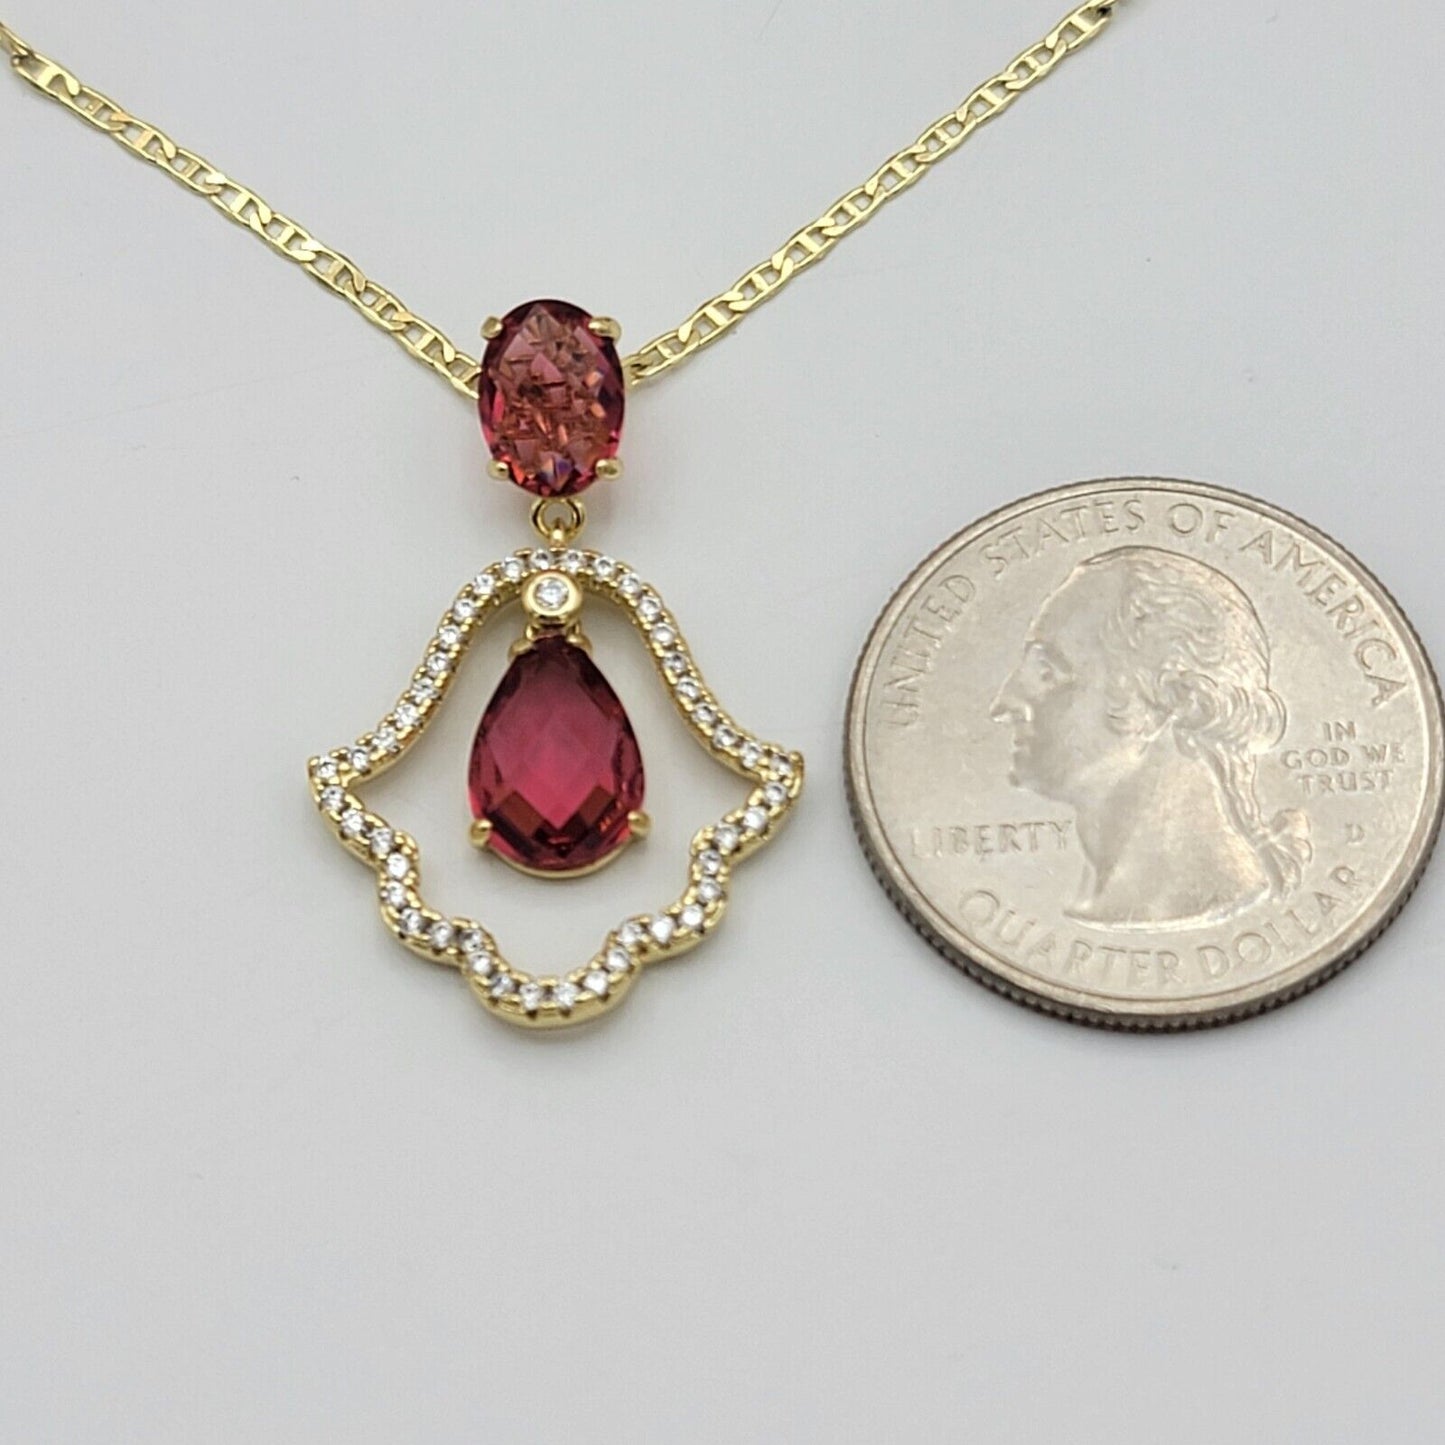 Necklaces - 14K Gold Plated. Hamsa Fatima Hand Dark Pink Red CZ Movable Charm Pendant & Chain.